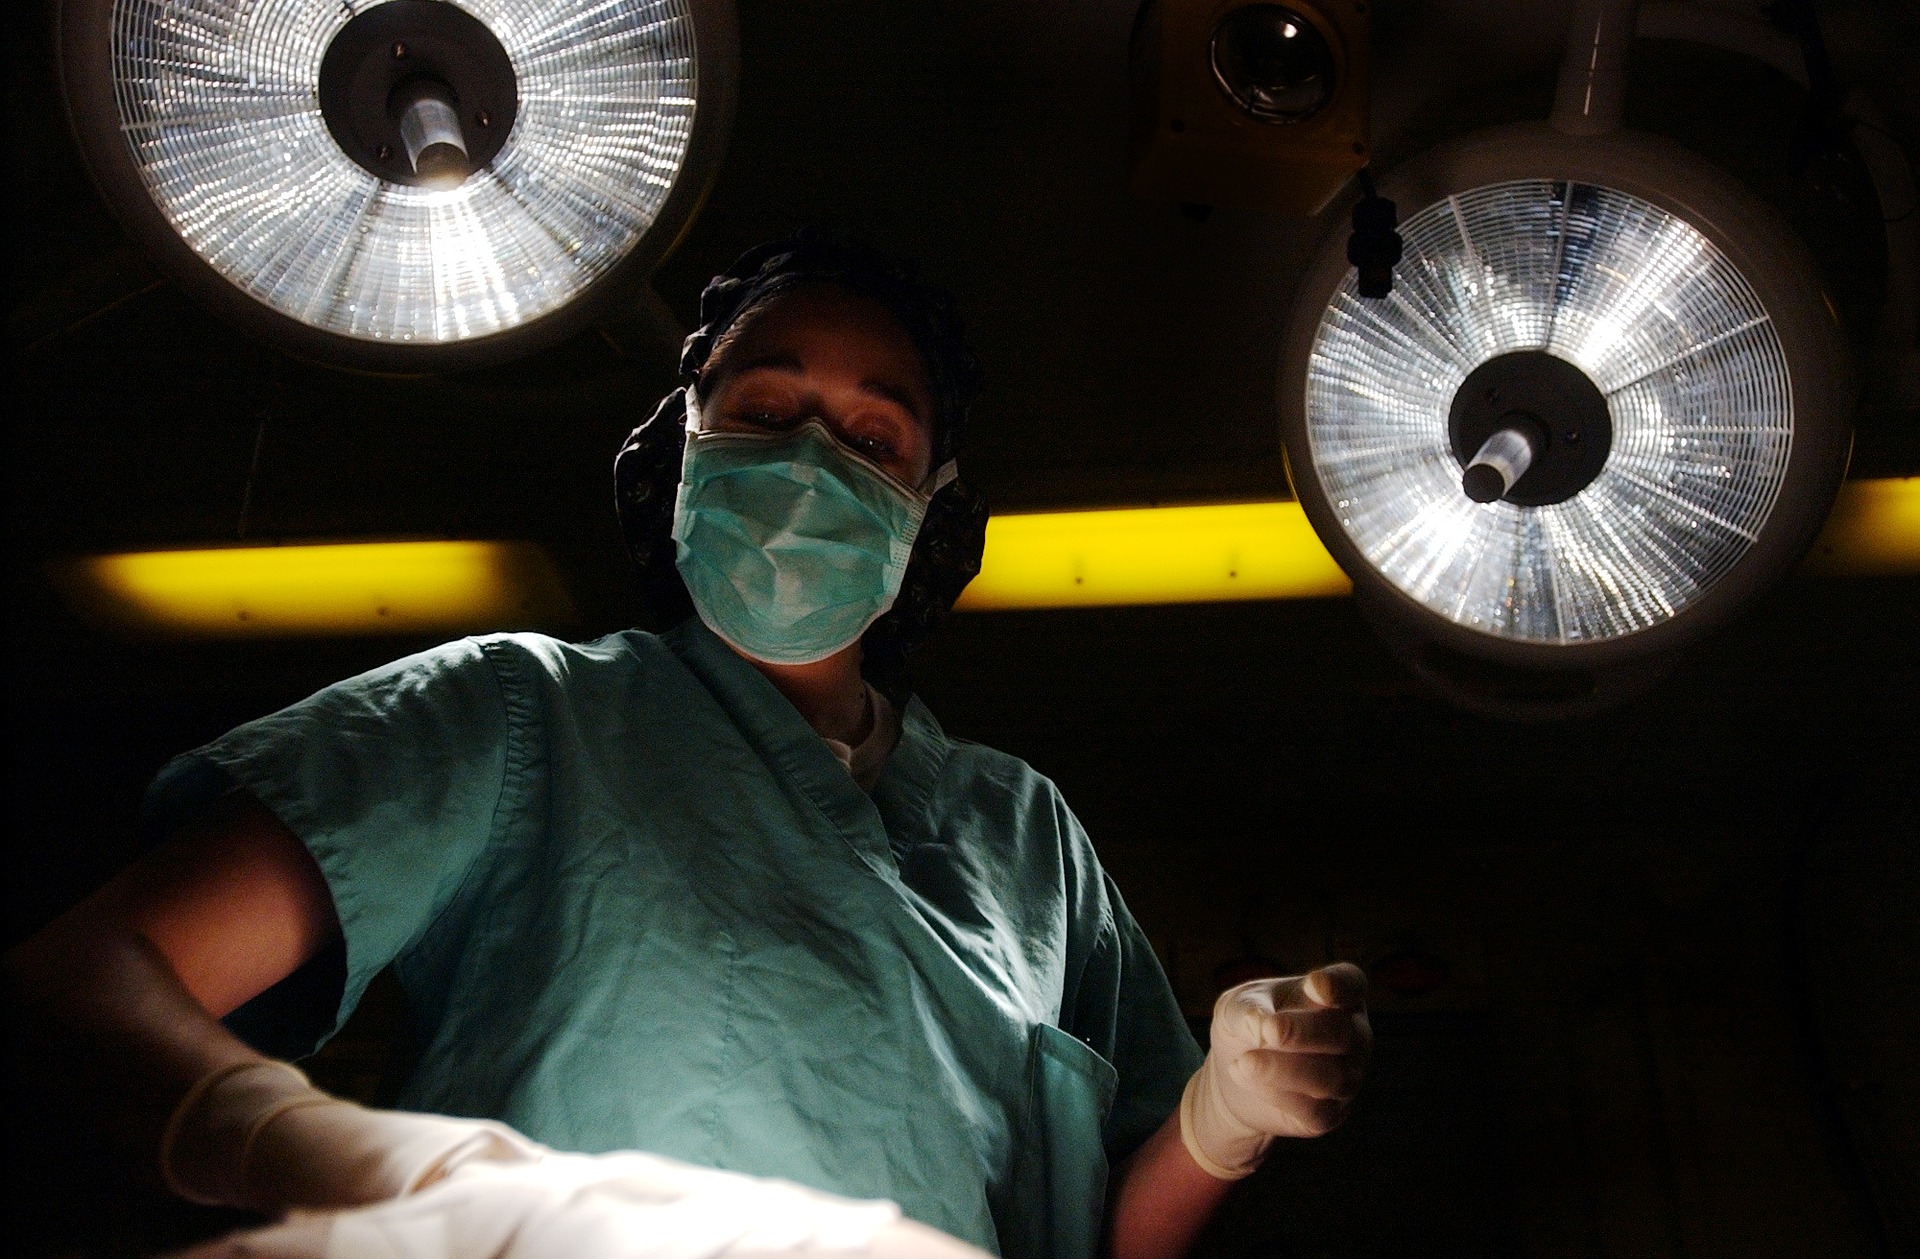 Surrounded by a darkened vignette, a doctor stands looking down towards the camera against two overhead lights. It is as if the camera or viewer is undergoing surgery.